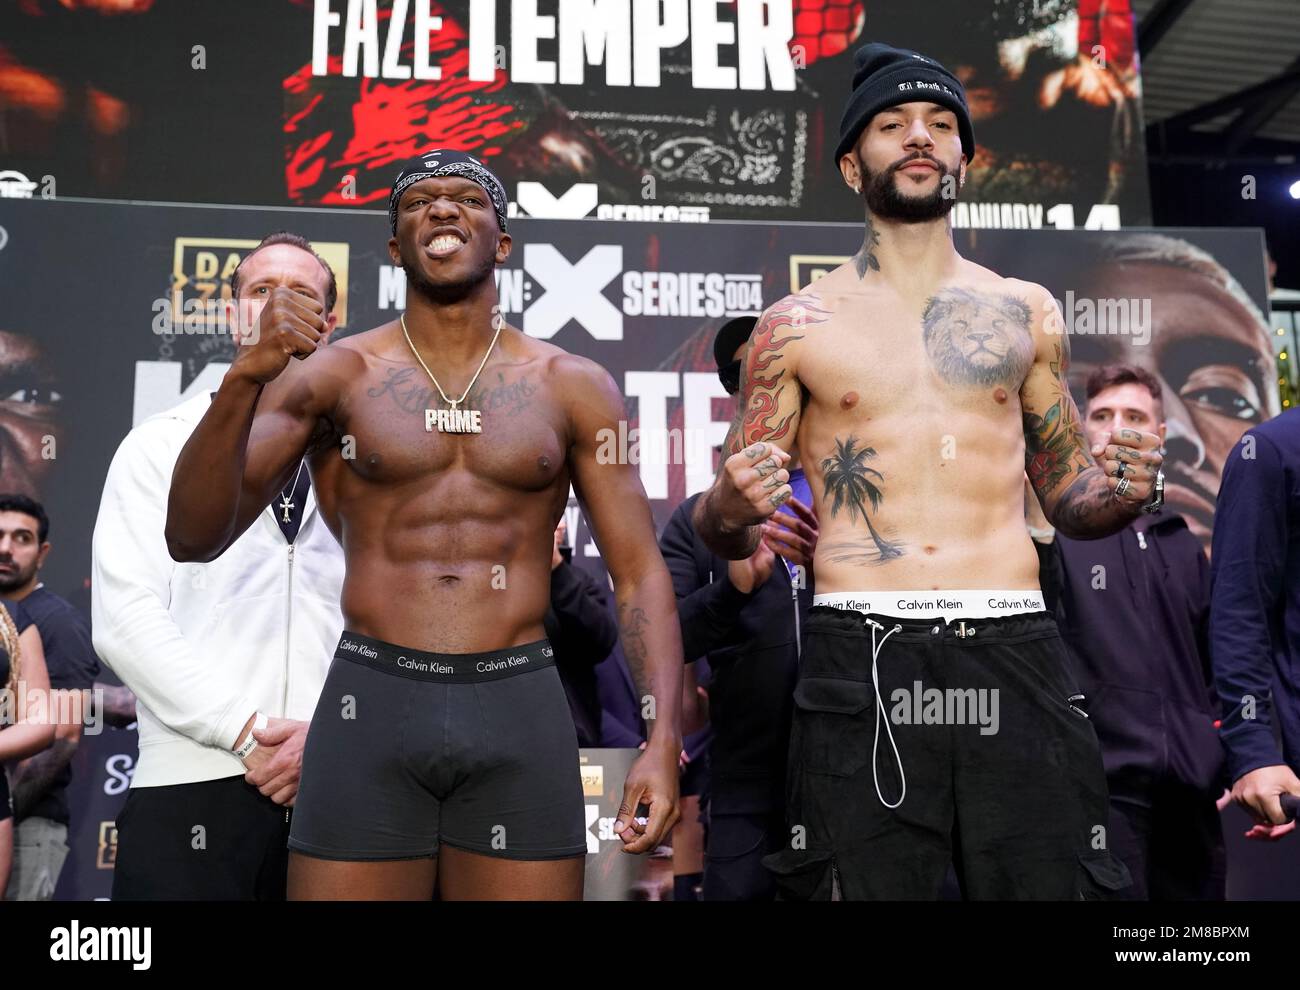 KSI (left) and FaZe Temperrr during the weigh-in at BOXPARK Wembley, London